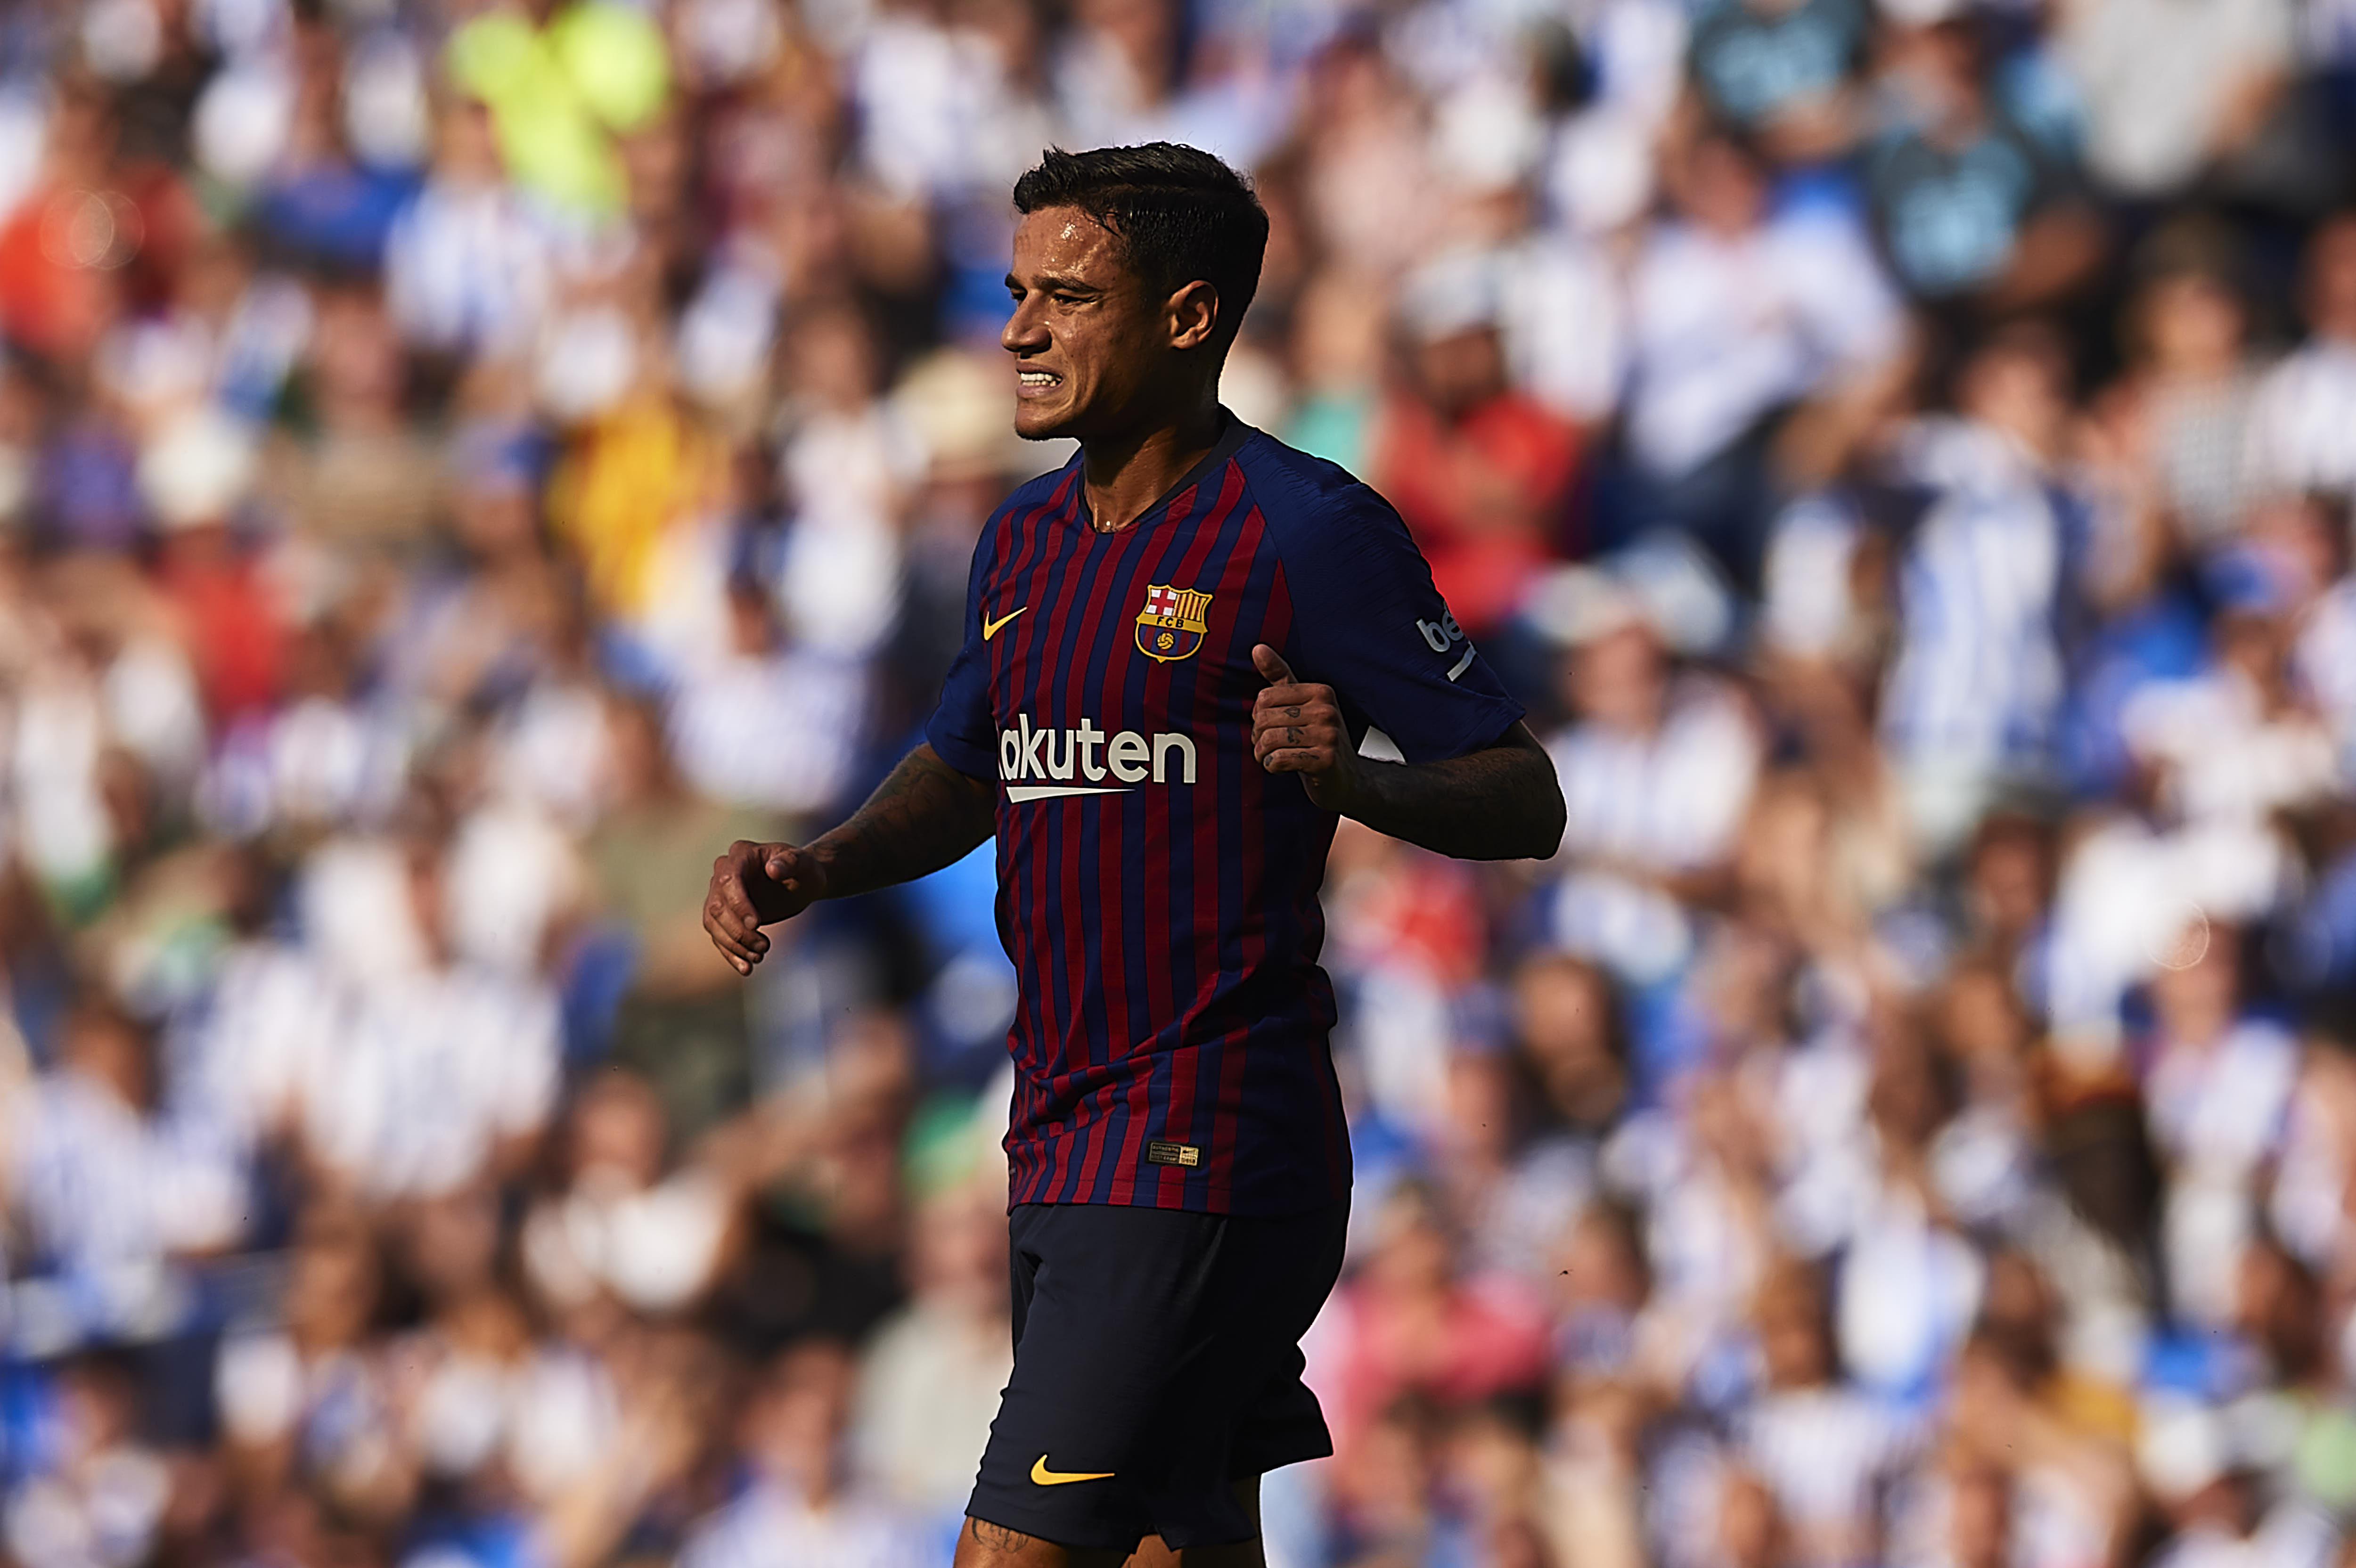 SAN SEBASTIAN, SPAIN - SEPTEMBER 15:  Philippe Coutinho of FC Barcelona  reacts during the La Liga match between Real Sociedad and FC Barcelona at Estadio Anoeta on September 15, 2018 in San Sebastian, Spain.  (Photo by Aitor Alcalde/Getty Images)